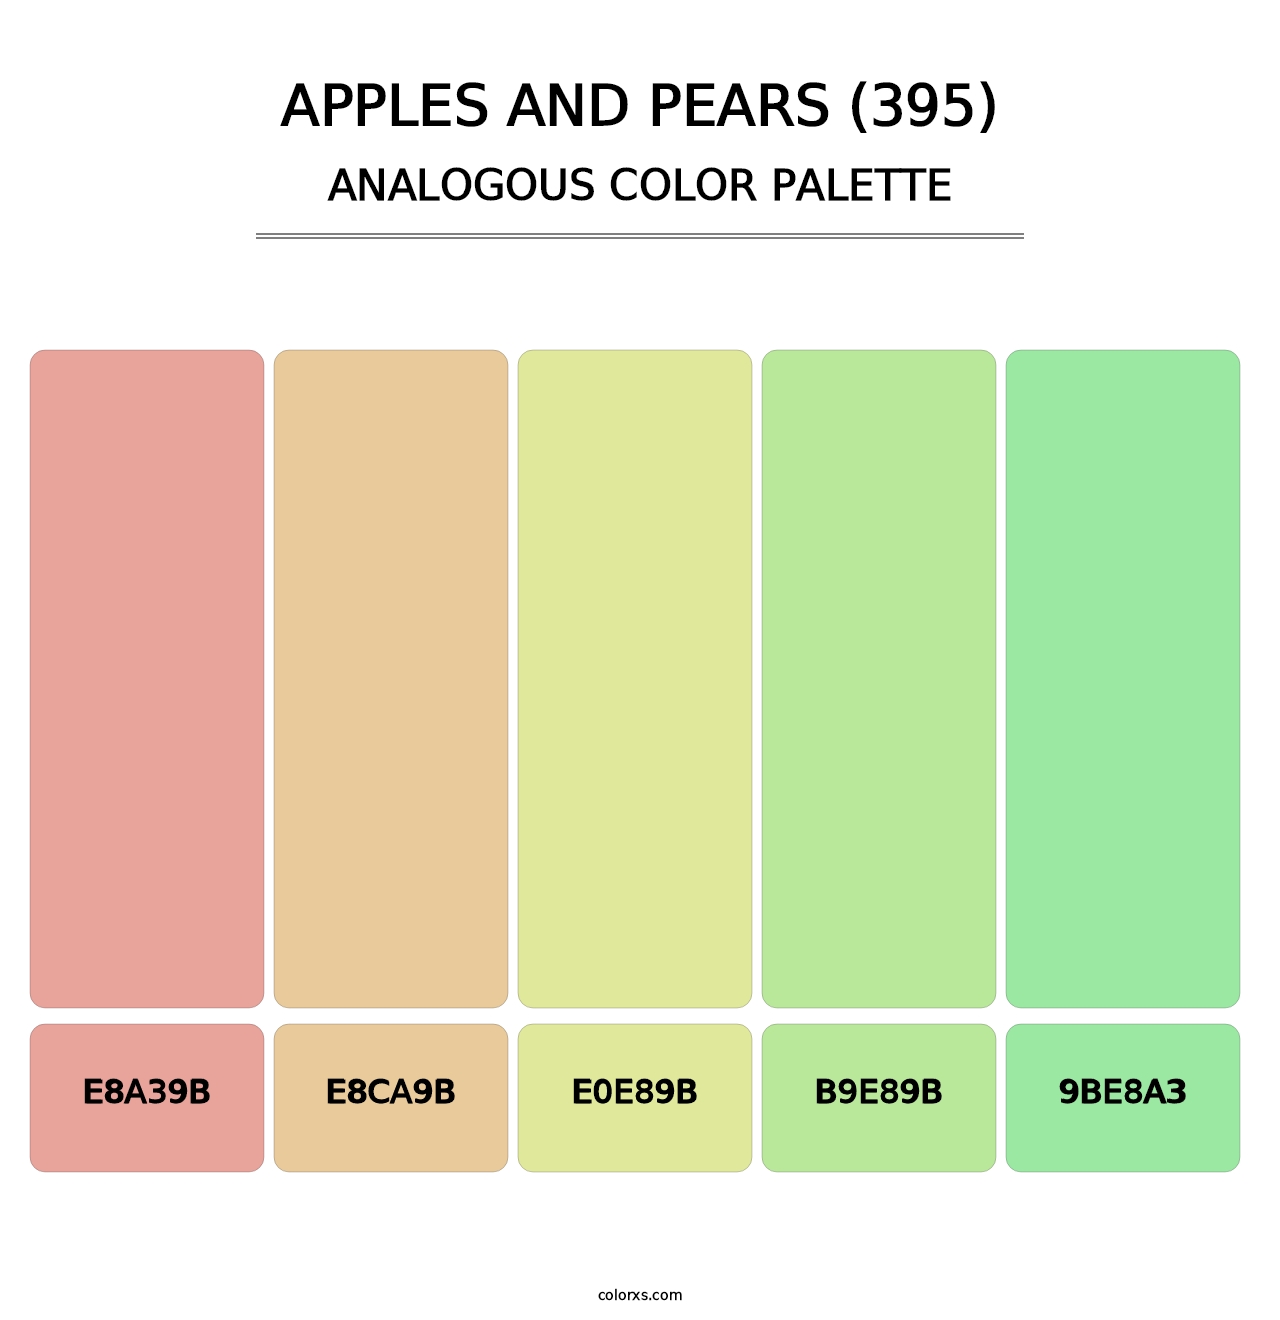 Apples and Pears (395) - Analogous Color Palette